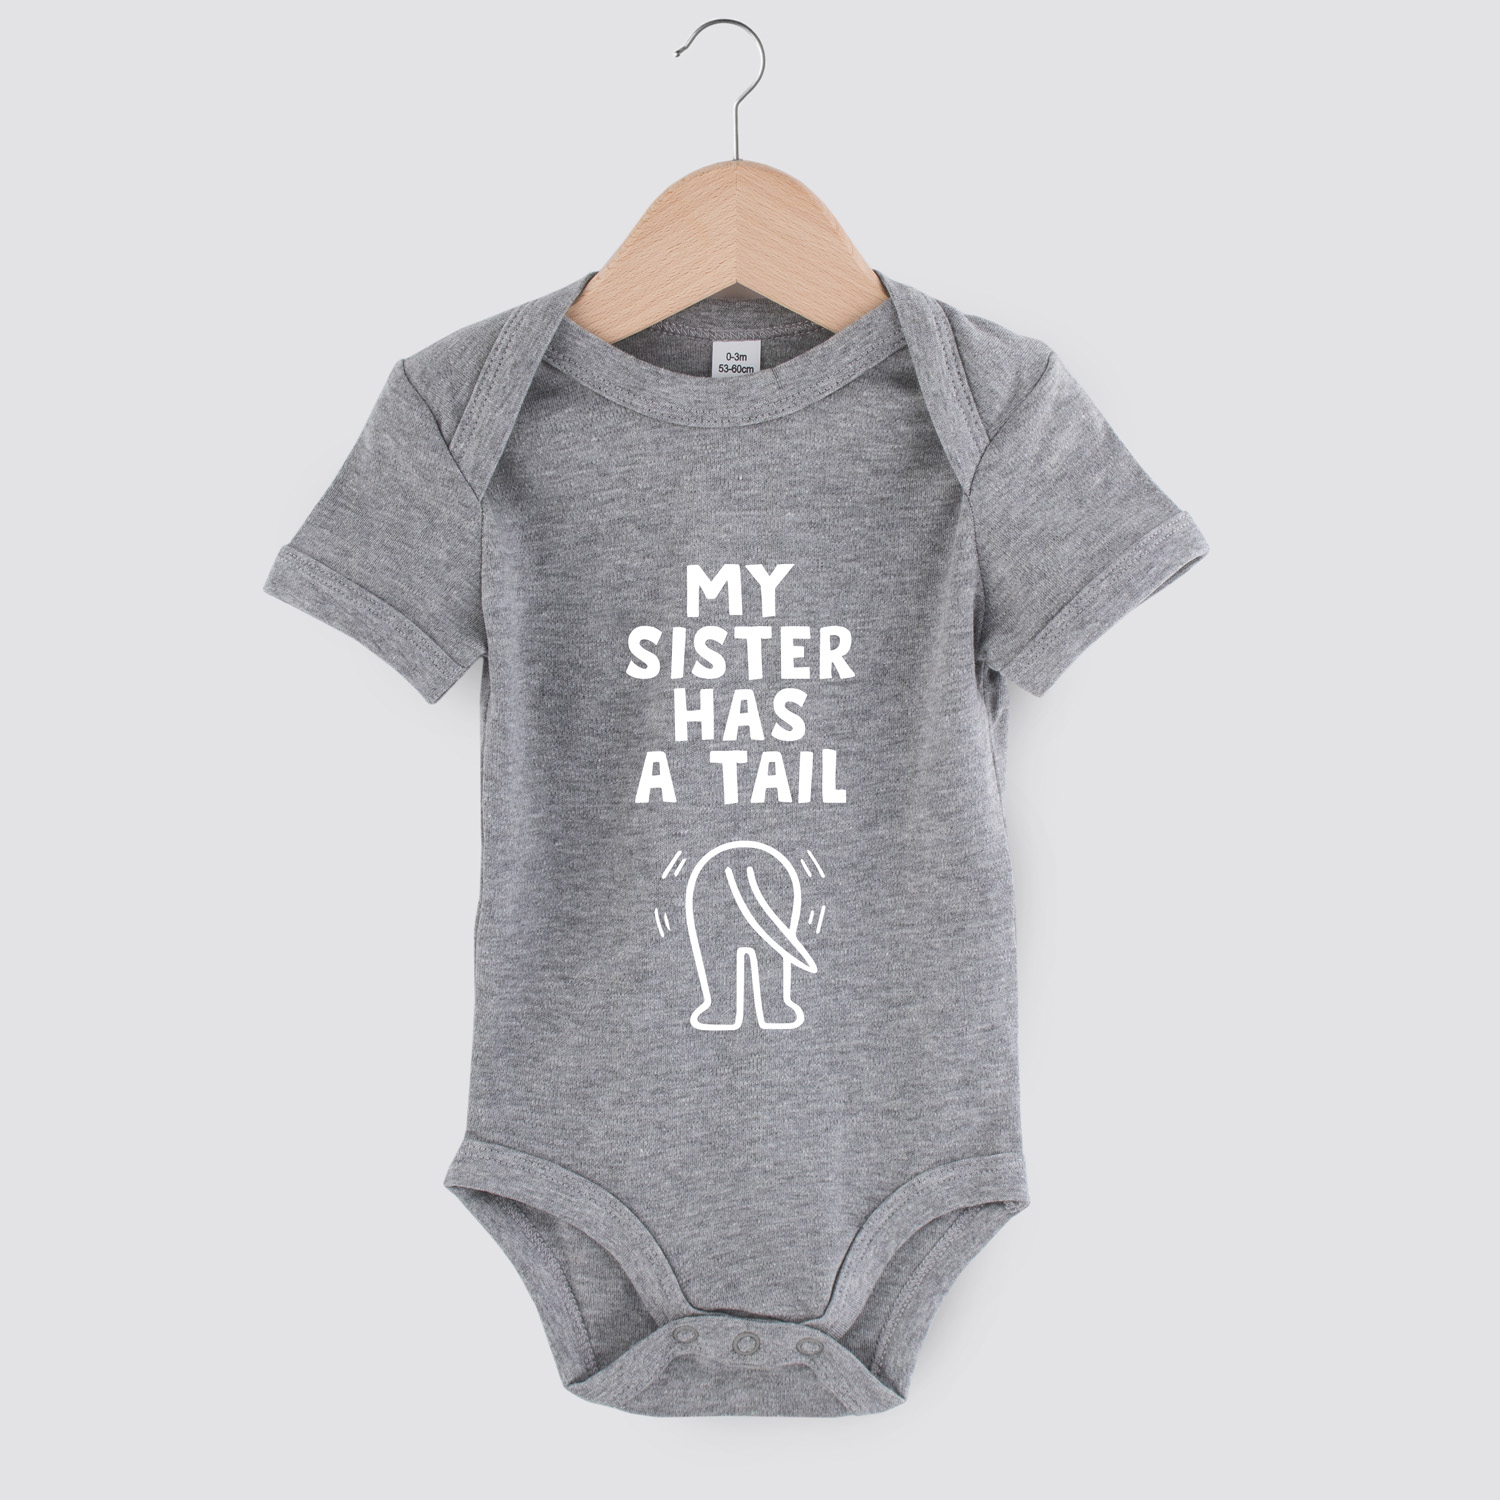 My sister has a tail | Baby romper | my fabulous life.